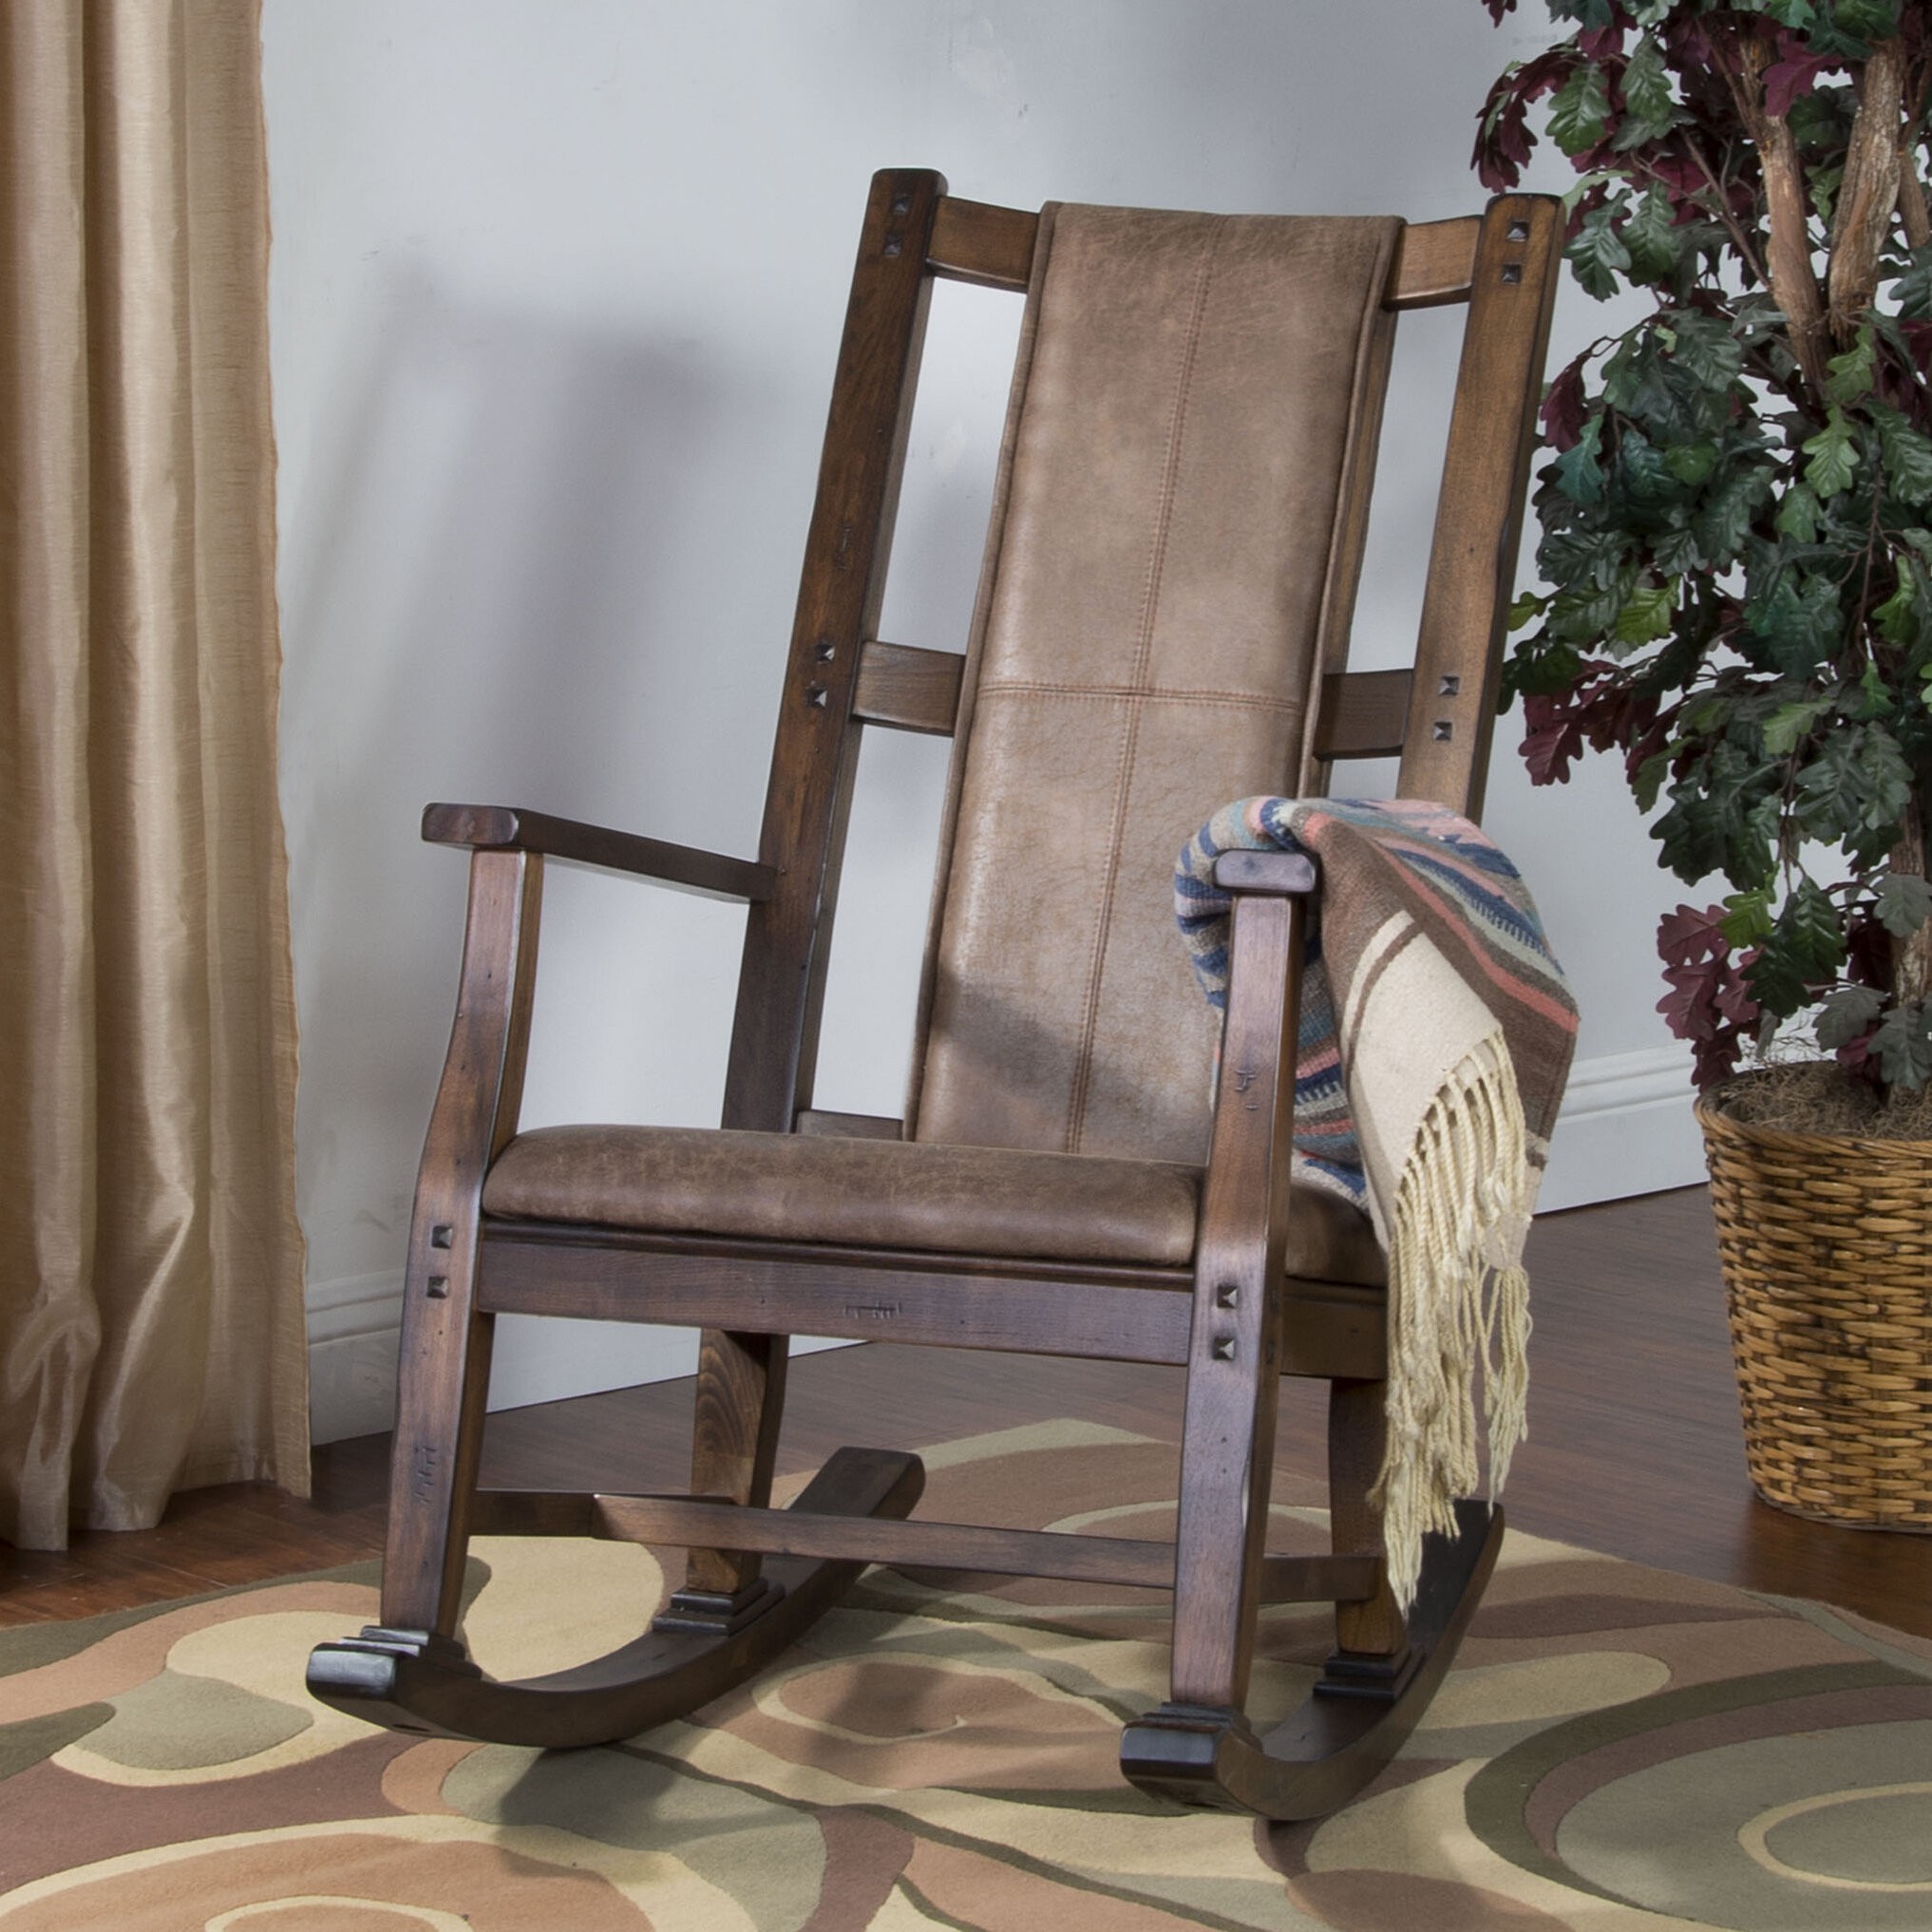 Rustic Leather Rocking Chair